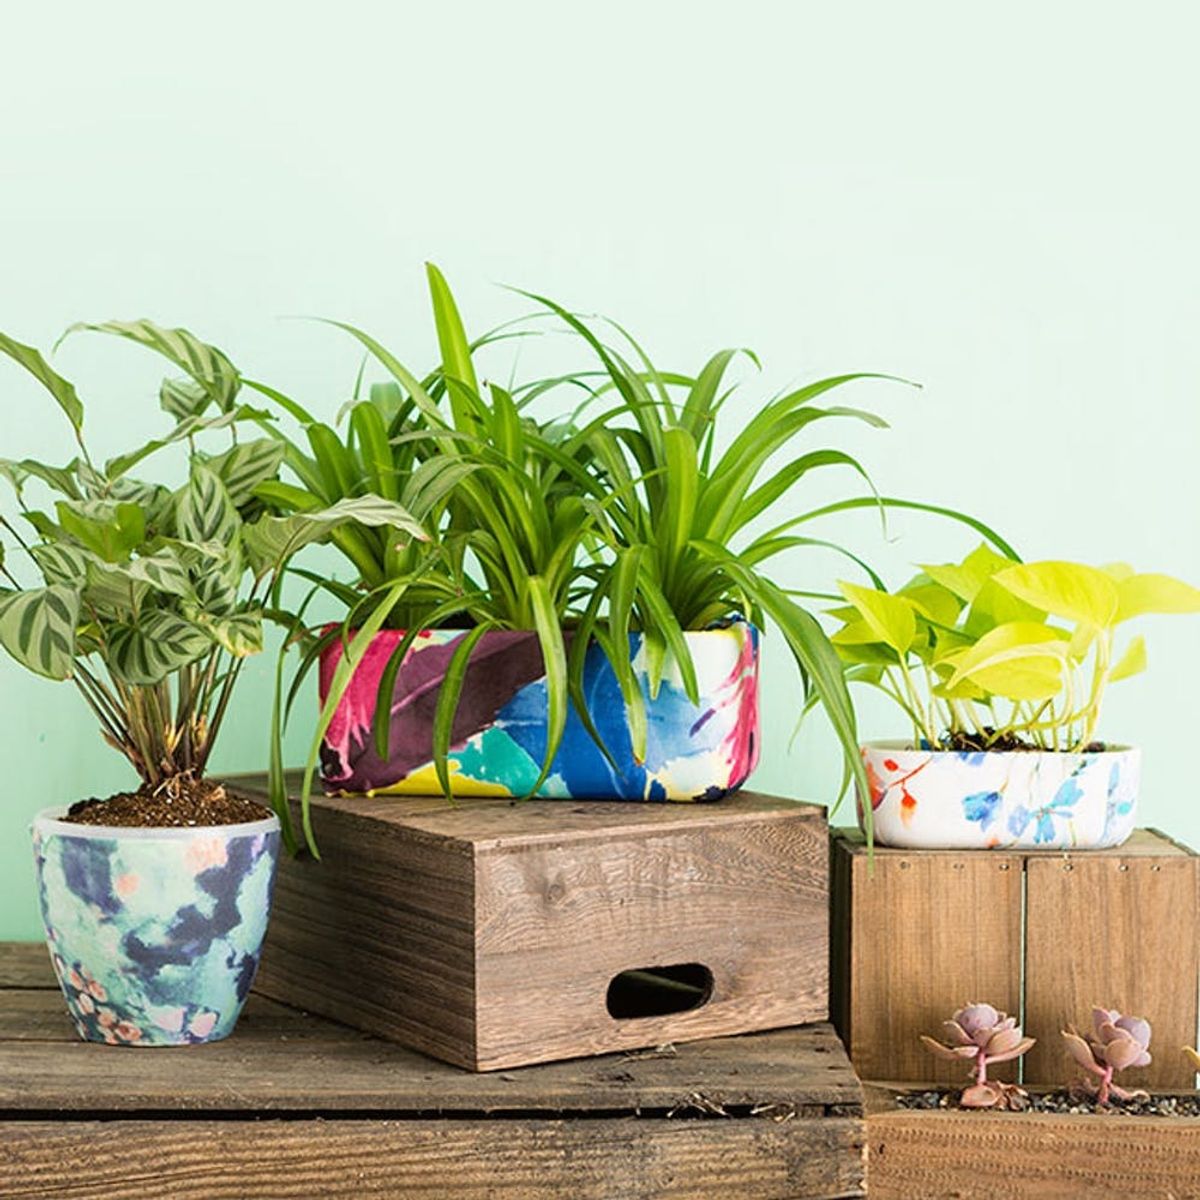 Update Your Planters for Spring With This Anthropologie Hack